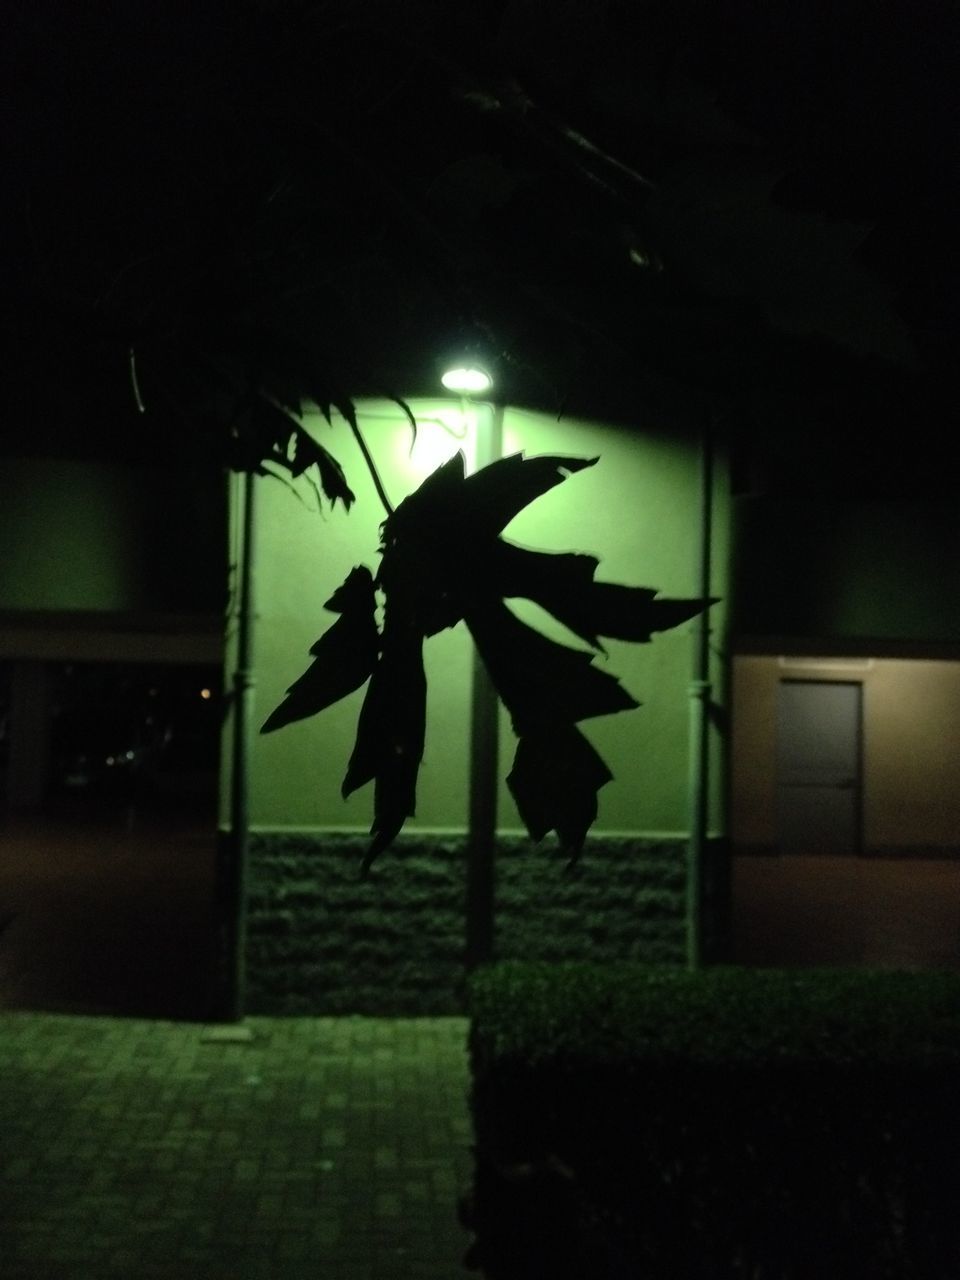 SILHOUETTE PERSON SEEN THROUGH WINDOW AT NIGHT